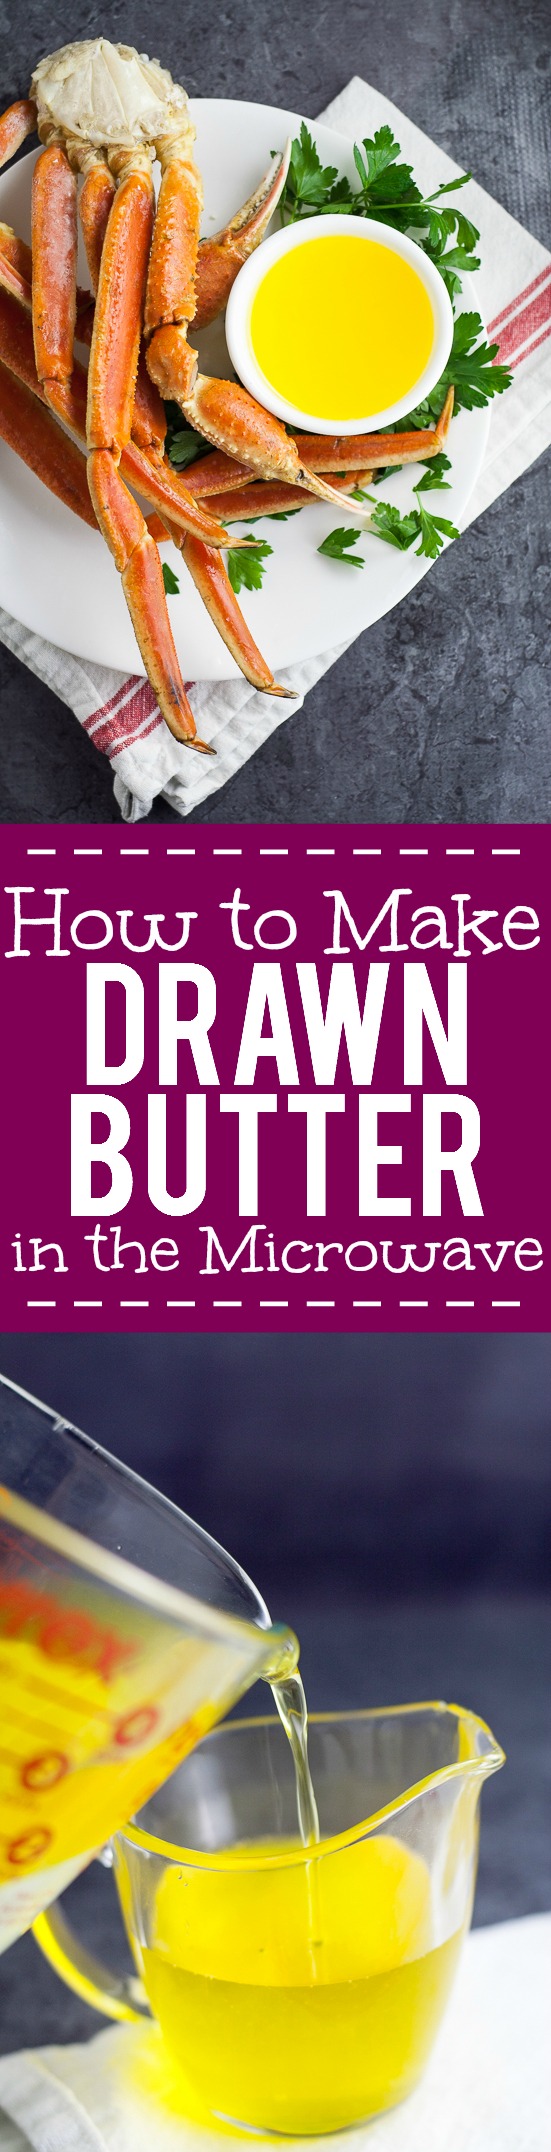 How to Make Clarified Butter in the Microwave Tutorial - Learn how to make clarified butter in the microwave in just 5 simple steps. Drawn butter is perfect for your favorite seafood and so easy to make! Wow! This will be perfect the next time we have surf and turf at home!